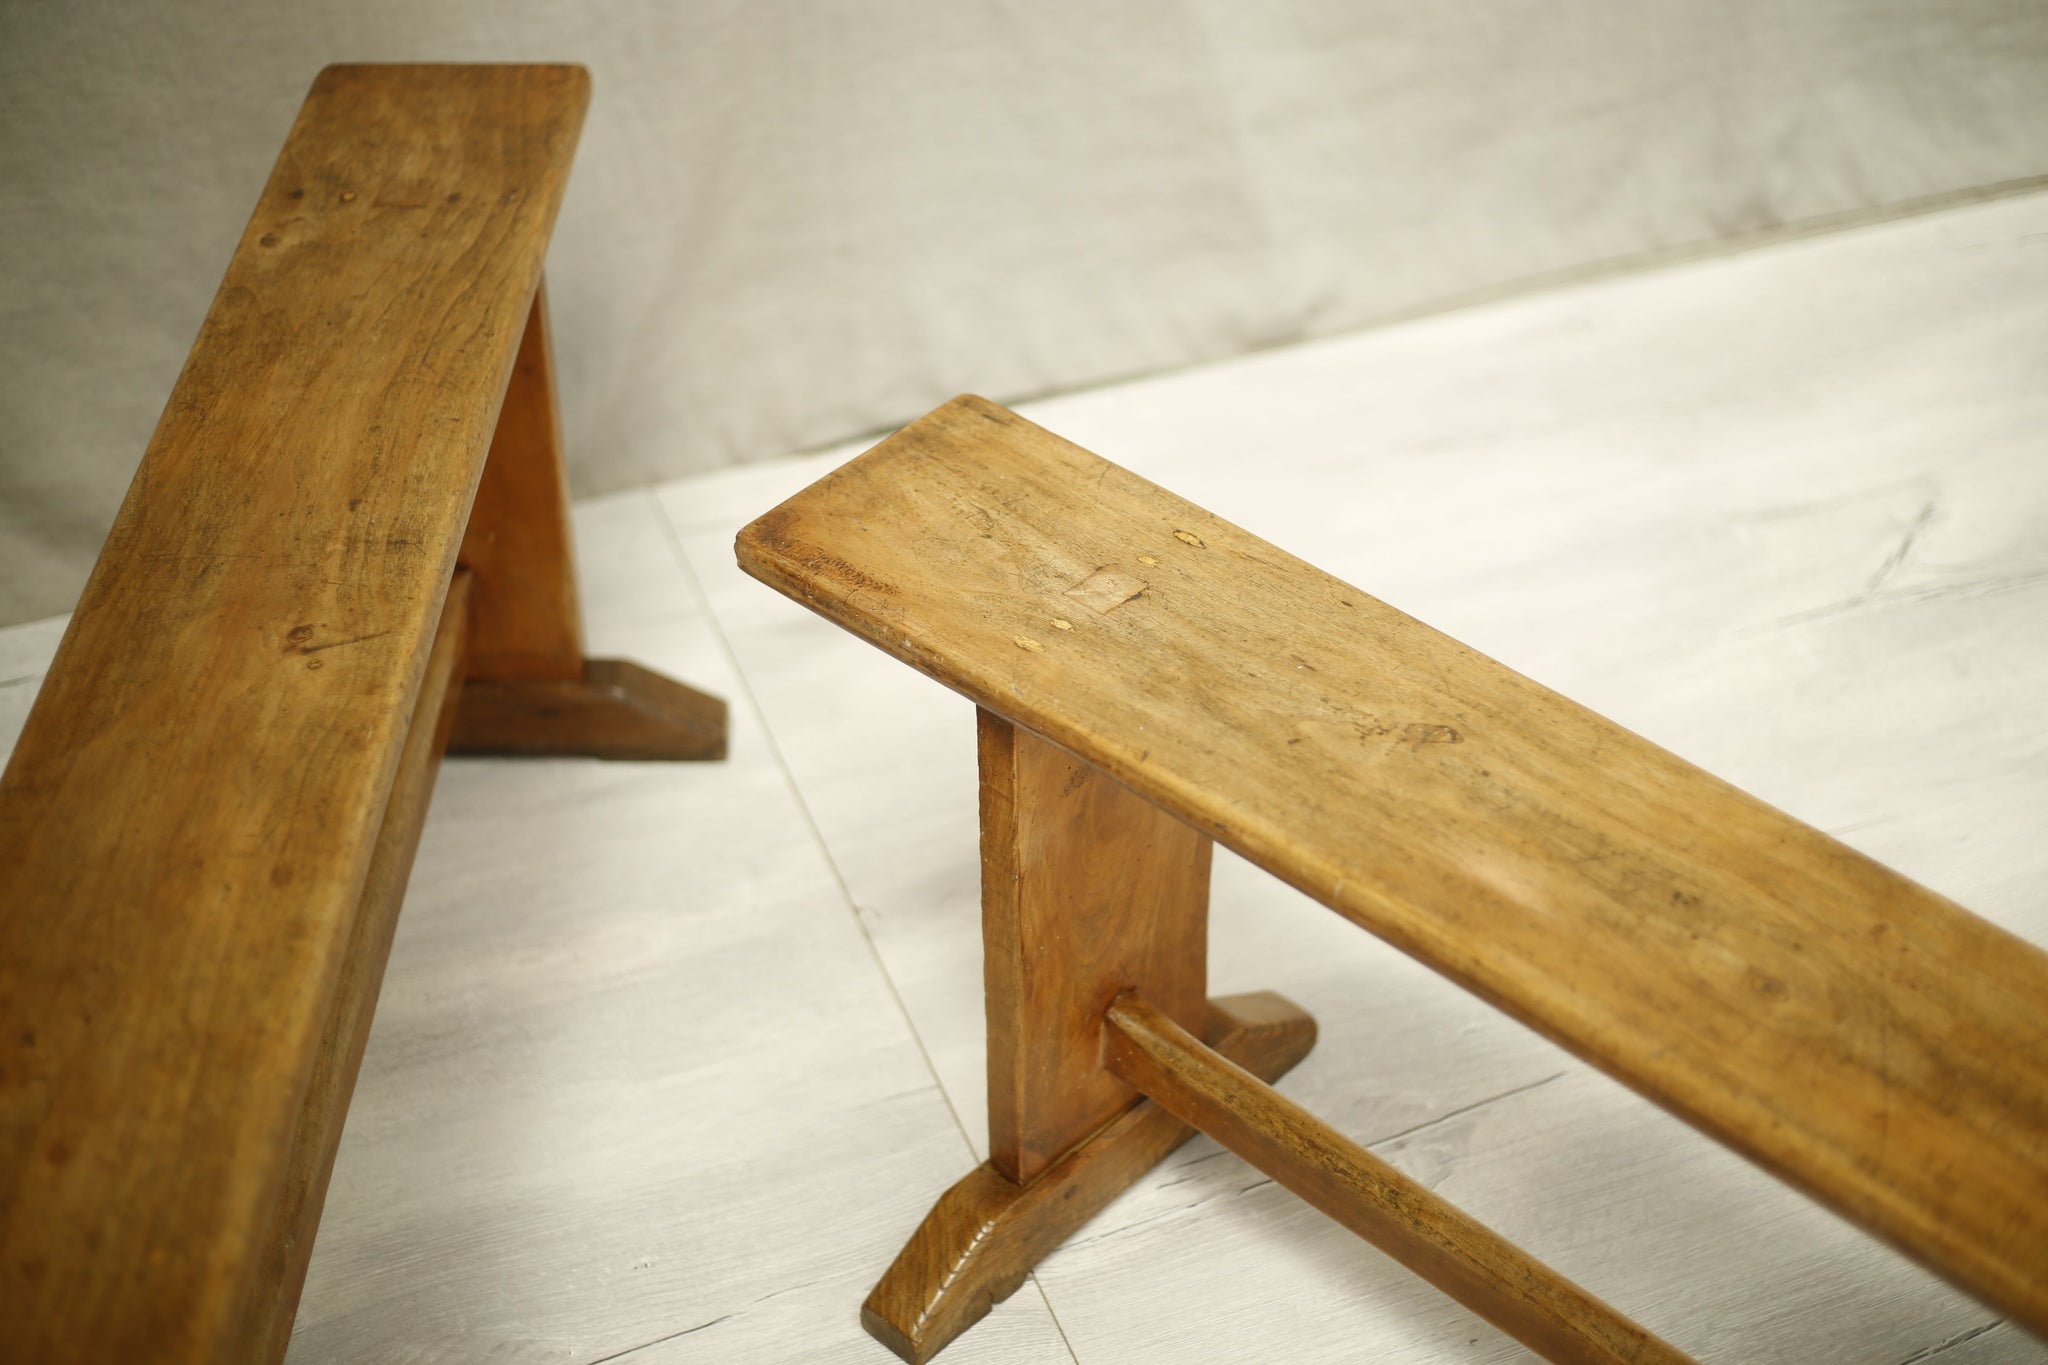 Pair of 2.5m 19th century country benches - TallBoy Interiors